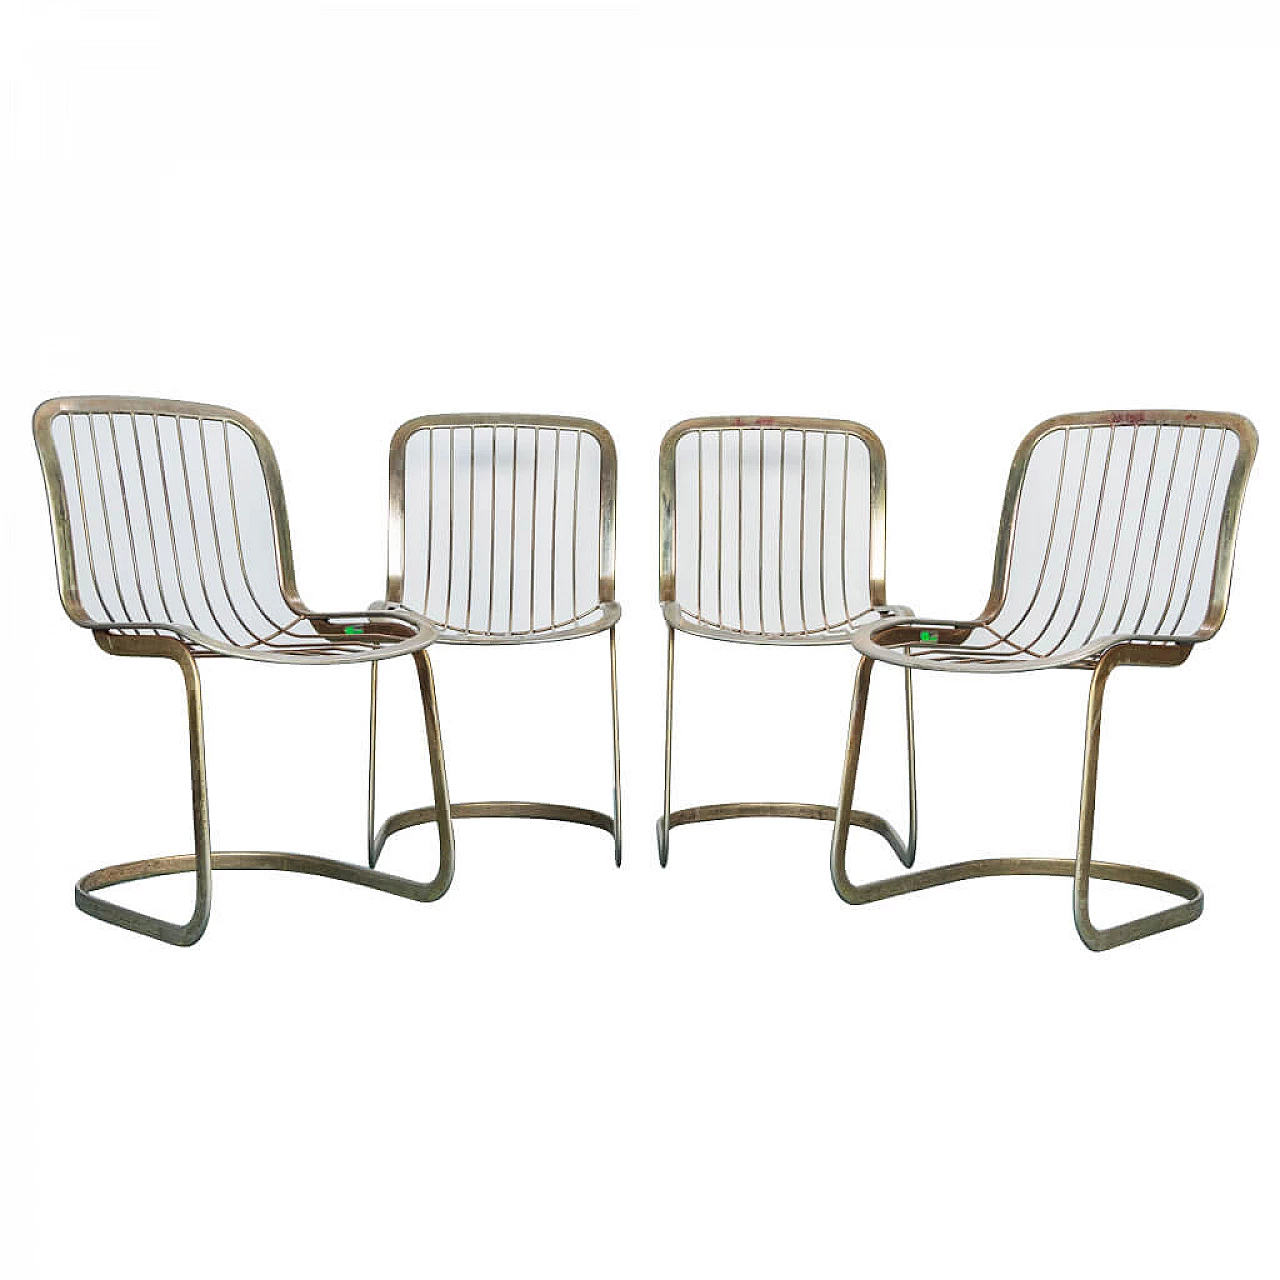 4 Metal chairs by Gastone Rinaldi for Cidue, '70s 1209994